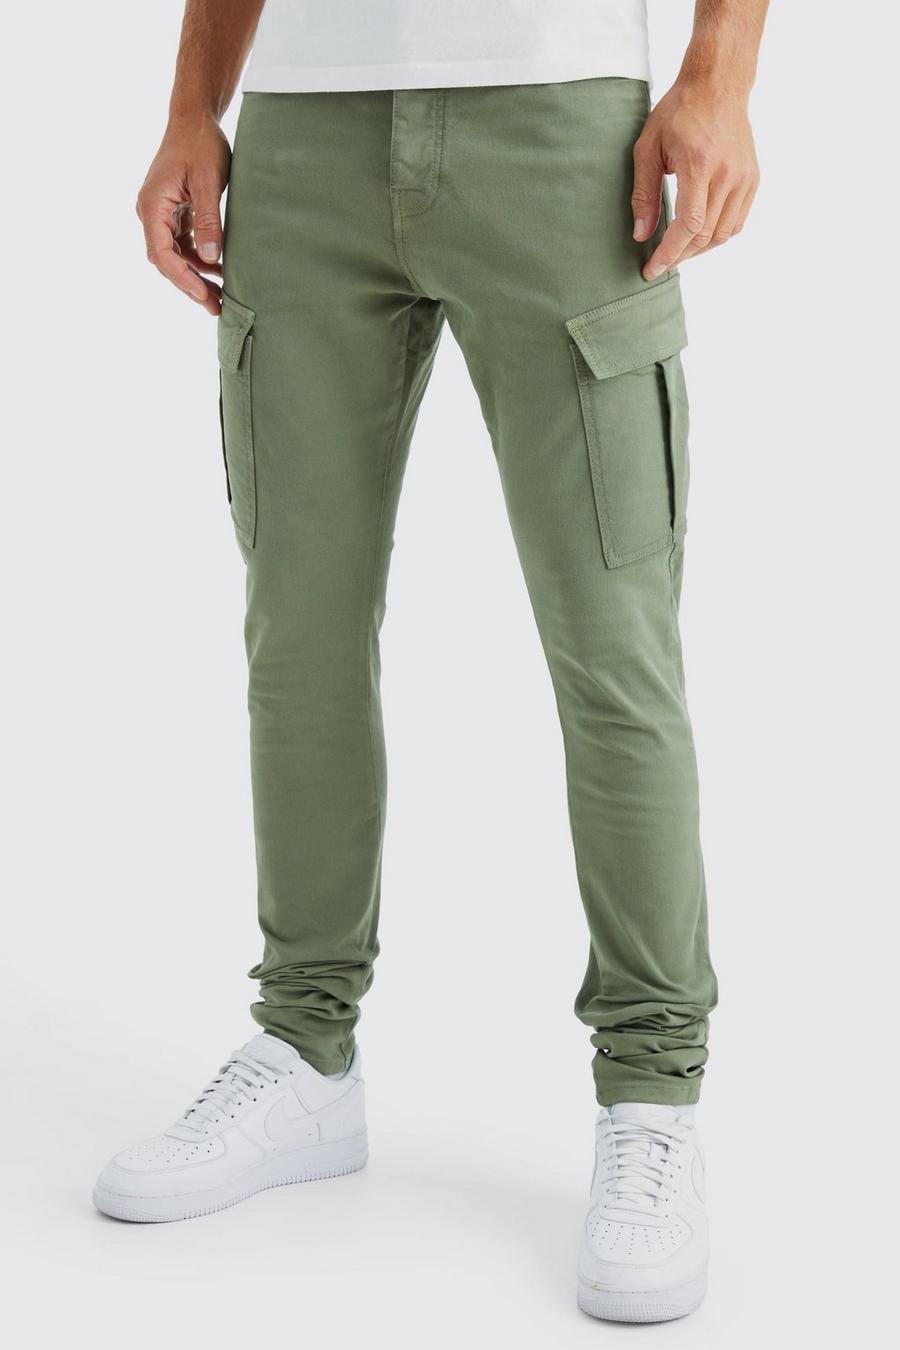 Olive Tall Fixed Waist Skinny Stacked Cargo Trouser